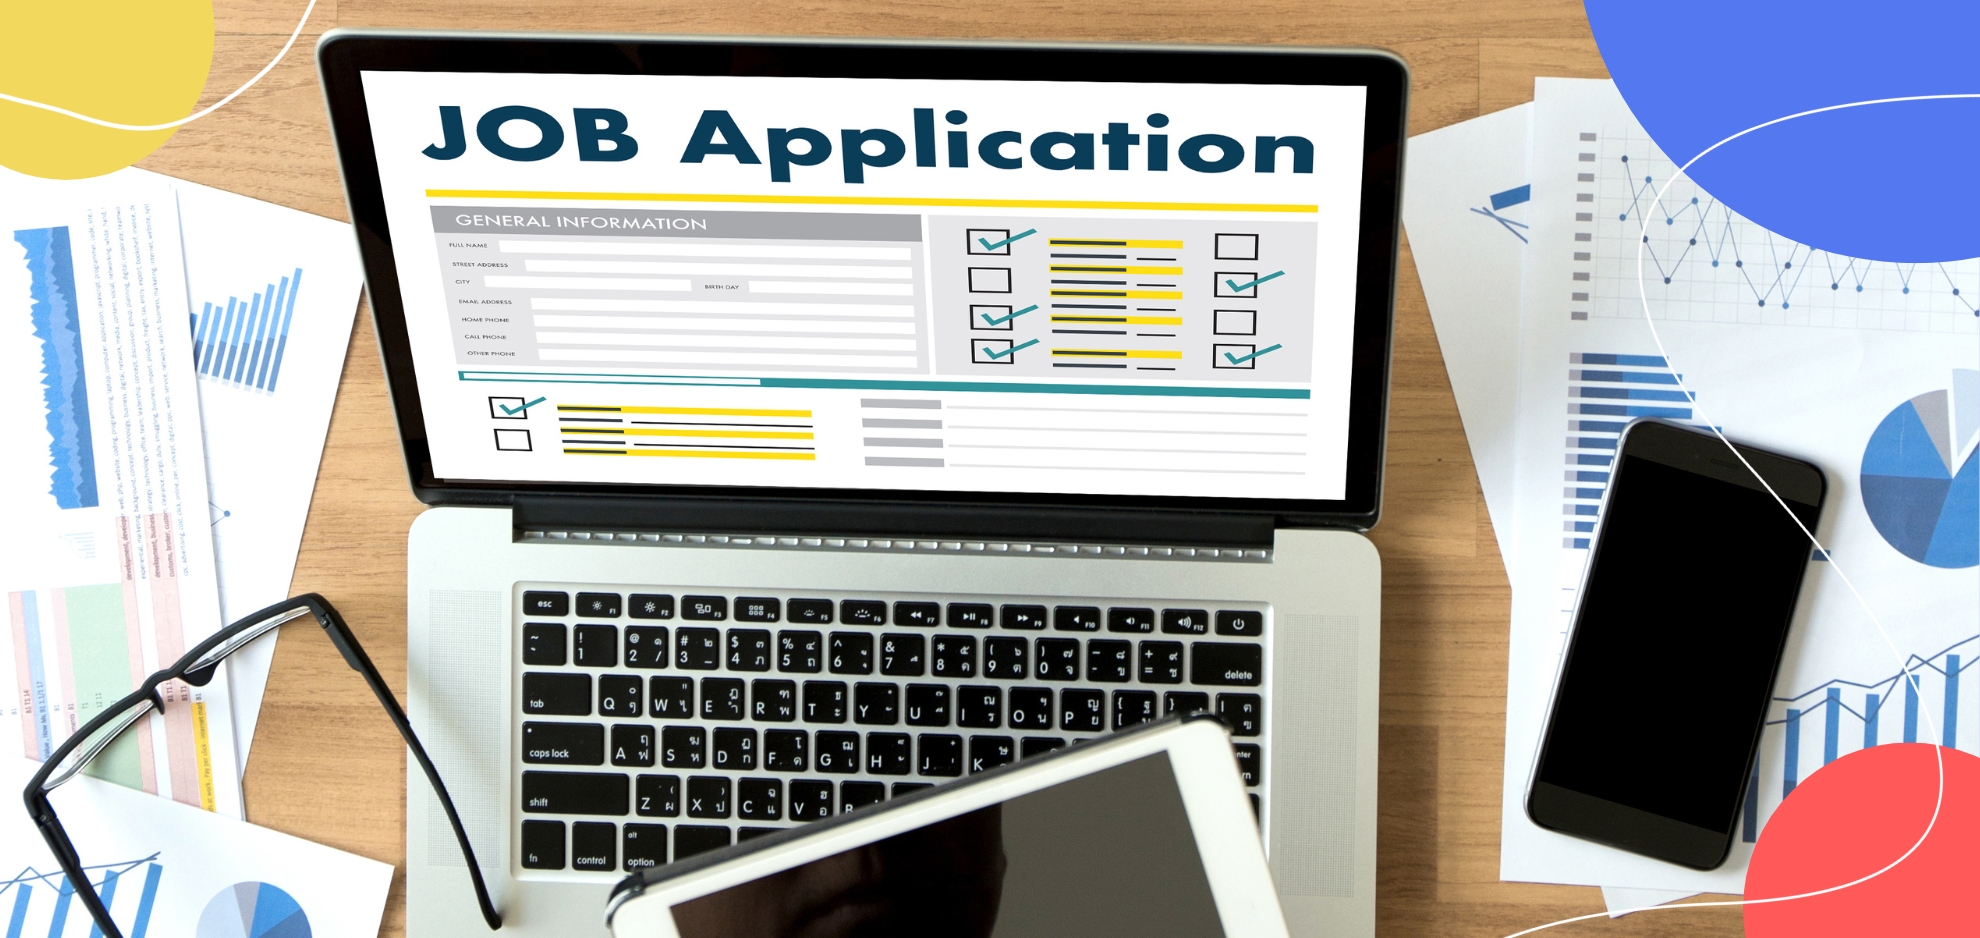 applicant tracking systems